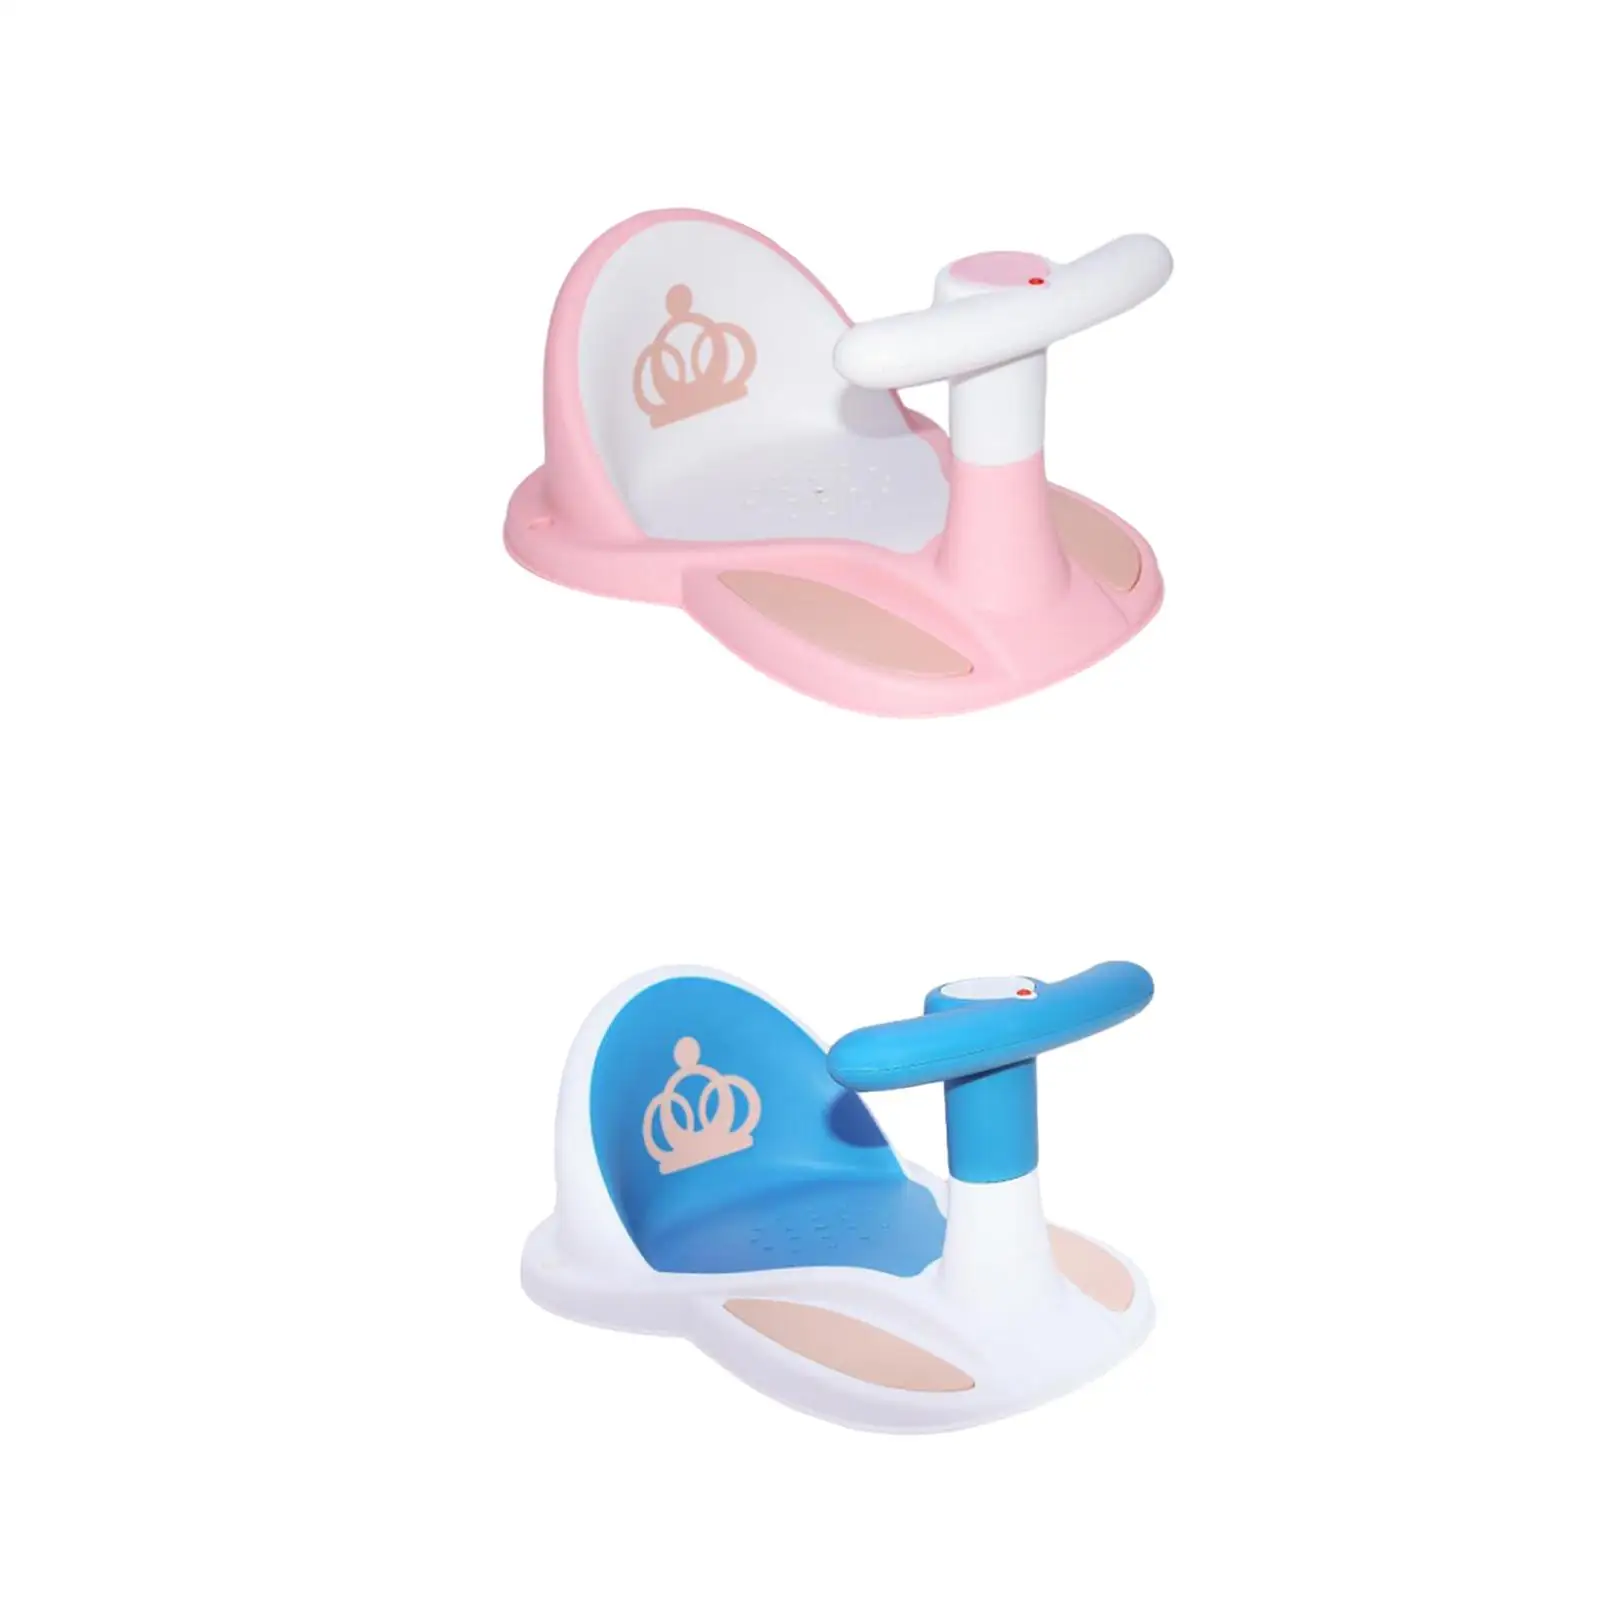 Children Shower Chair Portable Bathroom Safety with Suction Cup Newborn Shower Seats Baby Bathtub Seat for Infants Kids Toddlers